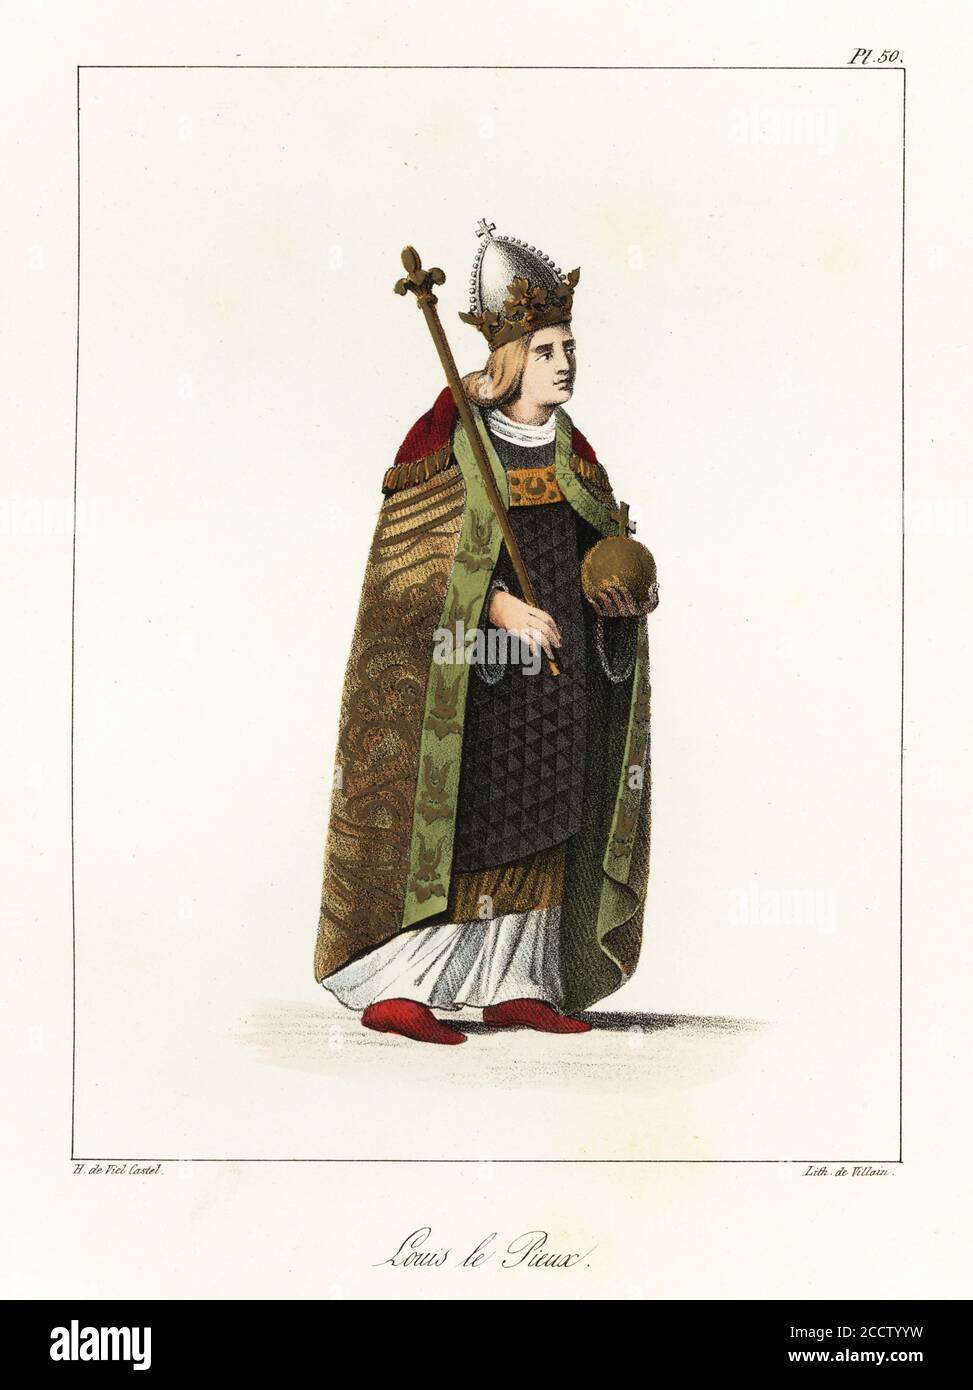 Louis the Pious, King of the Franks, co-emperor with his father,  Charlemagne, 778-840. In crown with orb and sceptre, chlamys over chasuble  and ecclesiastical robes. Louis le Pieux. Handcoloured lithograph by Villain